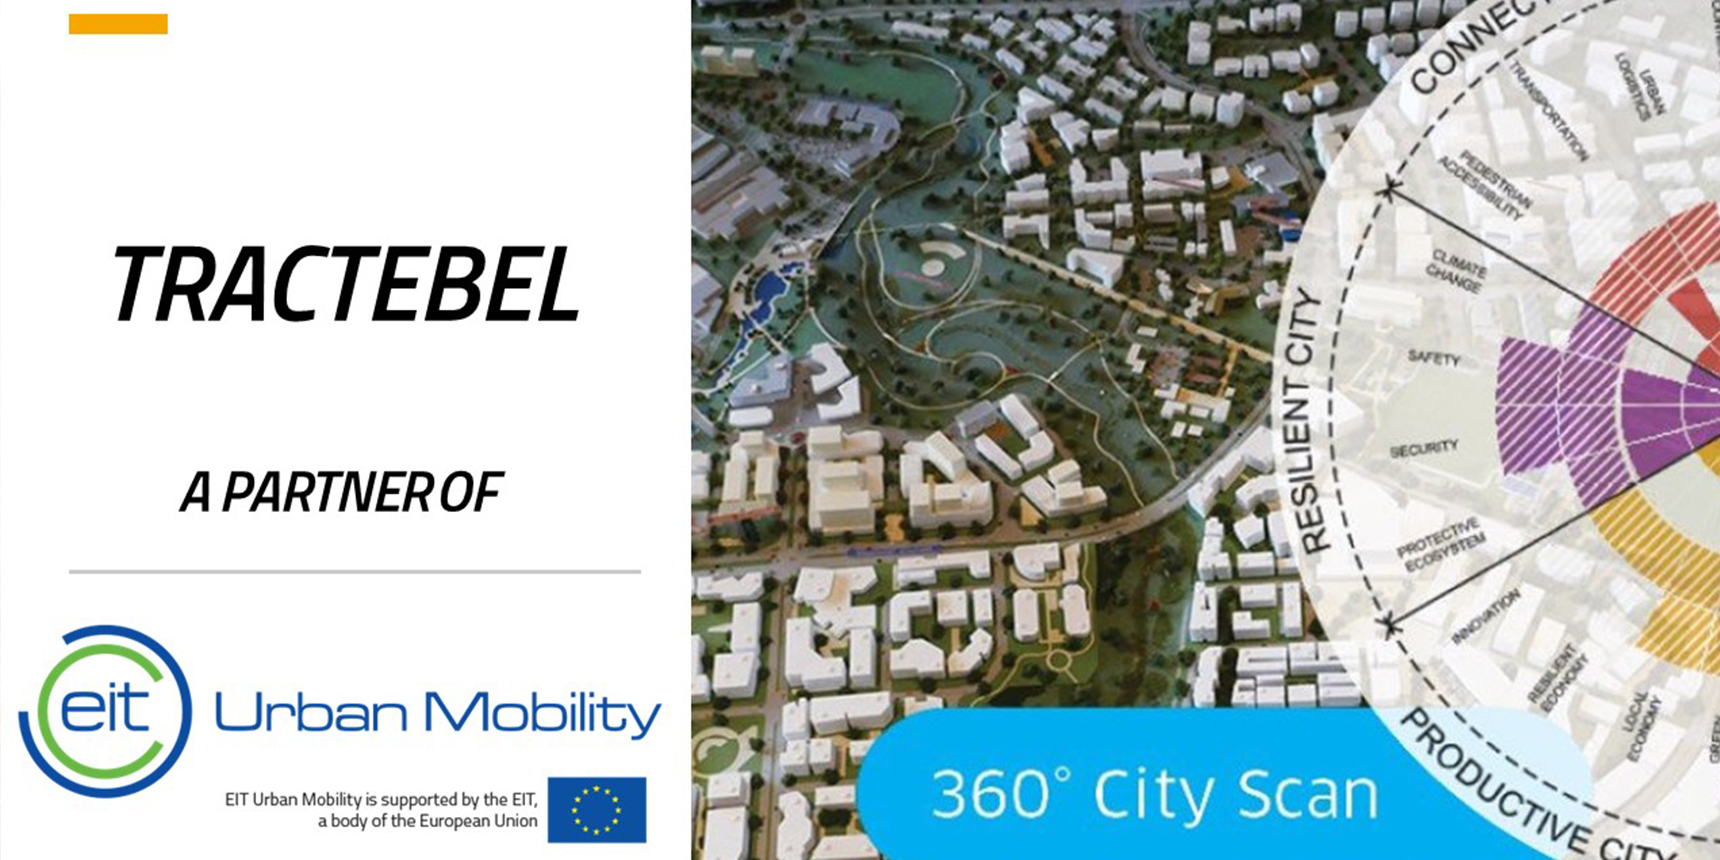 EIT Urban Mobility and Tractebel building today the cities of tomorrow